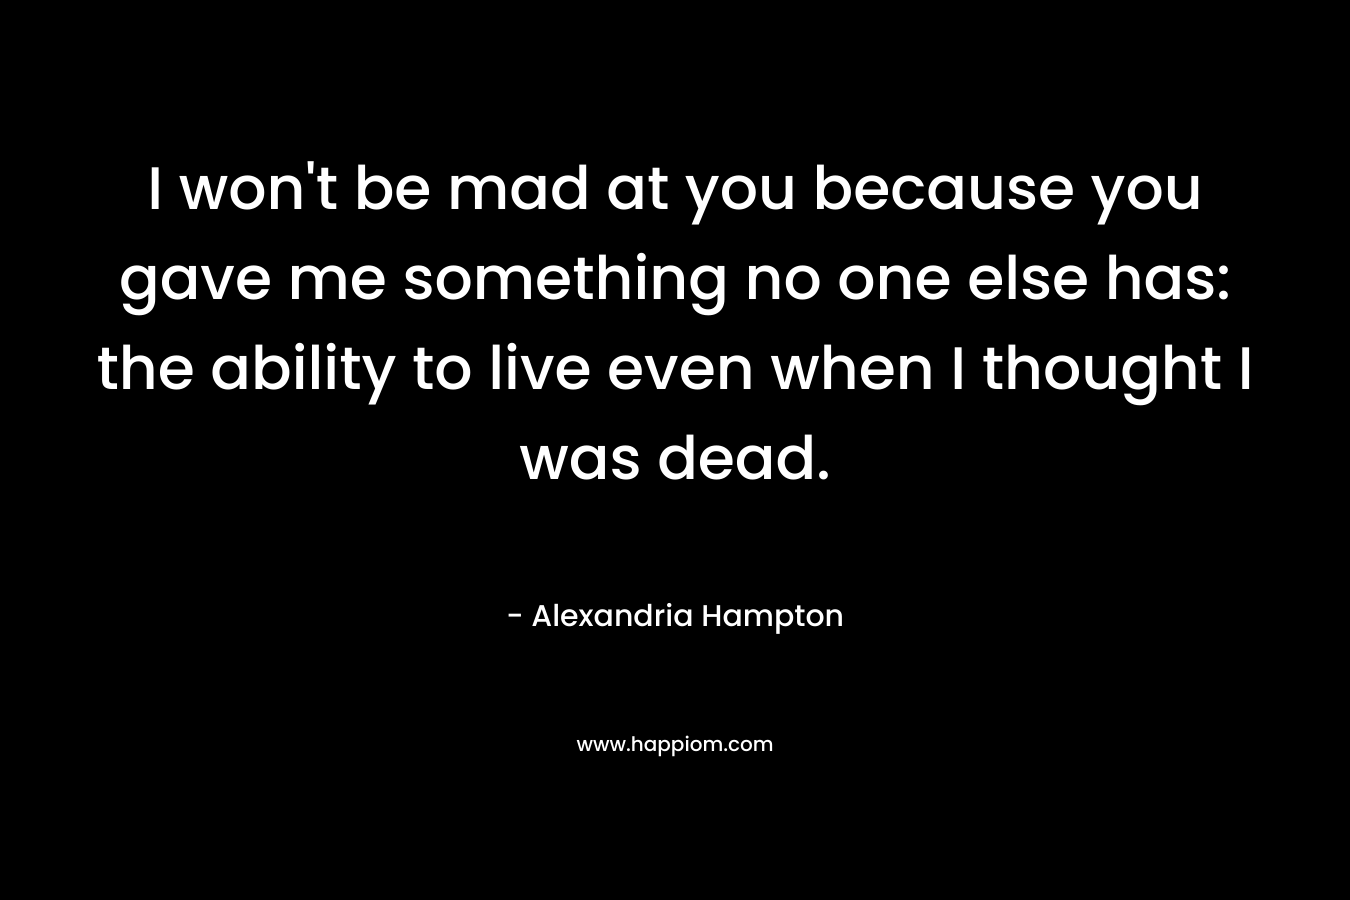 I won't be mad at you because you gave me something no one else has: the ability to live even when I thought I was dead.